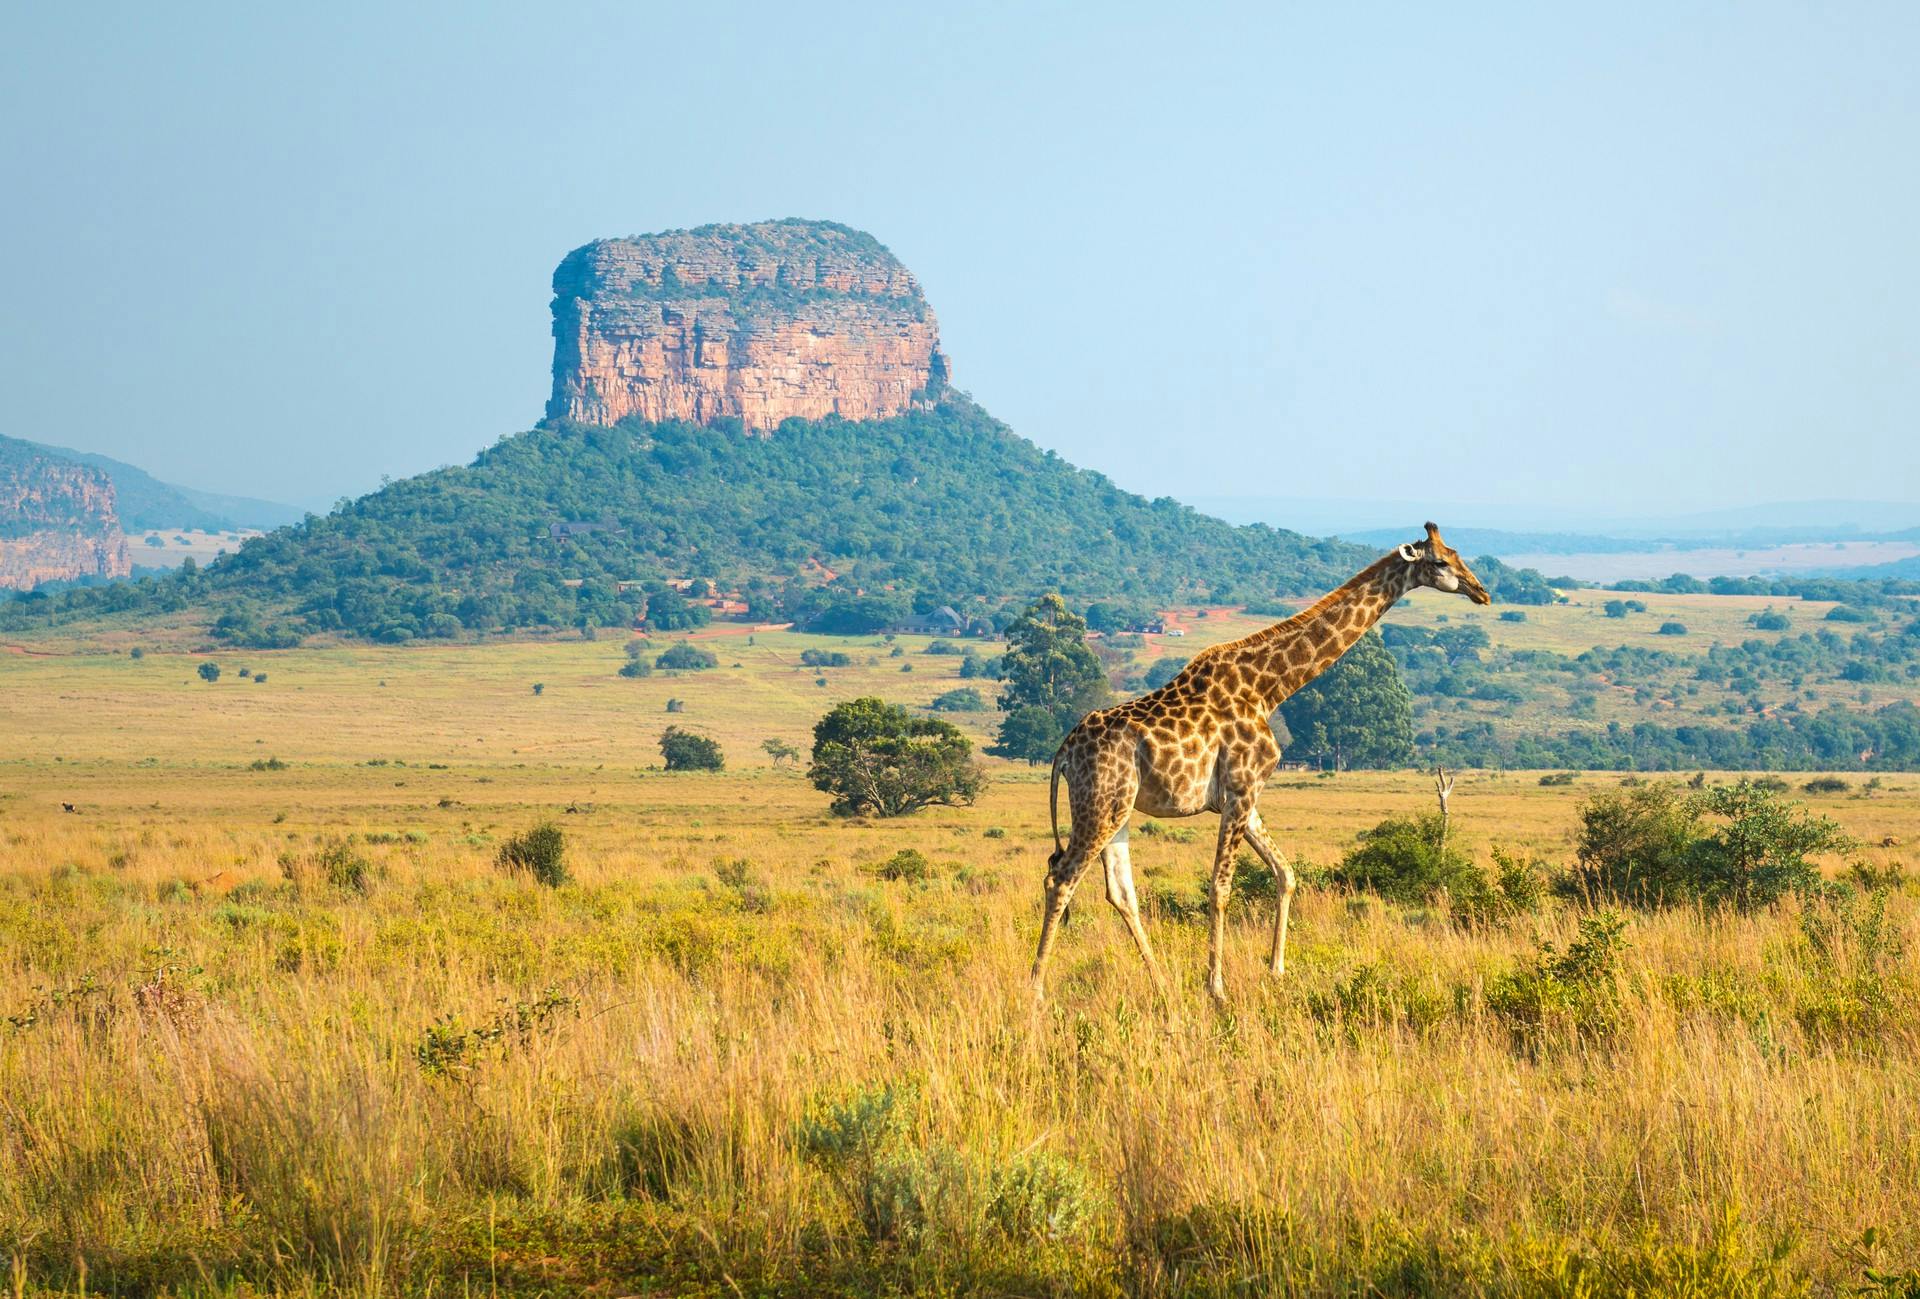 We're reimagining a fairer way to visit Africa